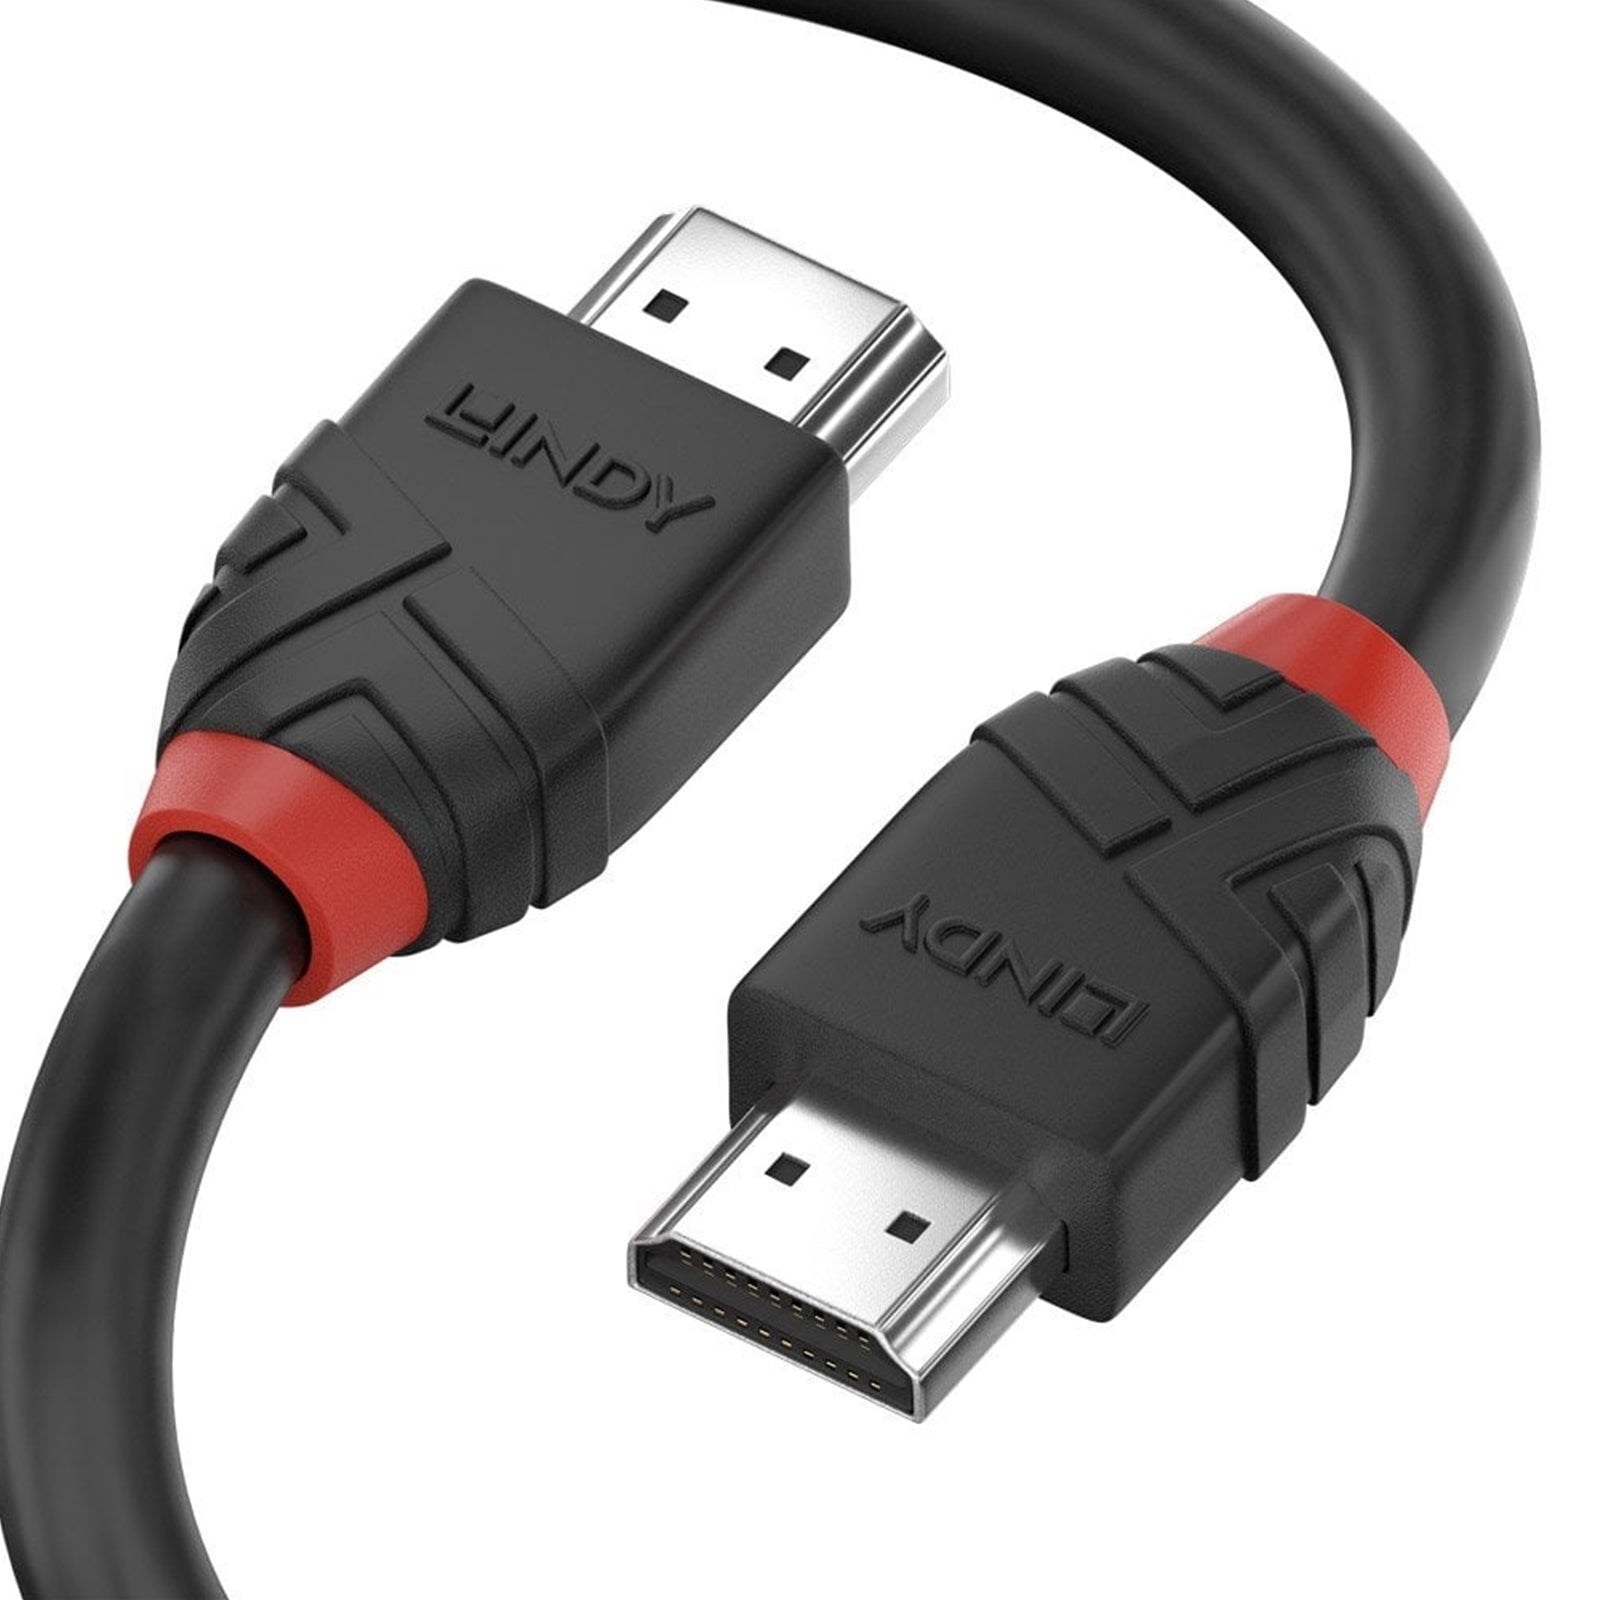 LINDY 36472 HDMI 2.0 Cable, 4K UHD, High-Speed 18Gbps, 2m Black & Red